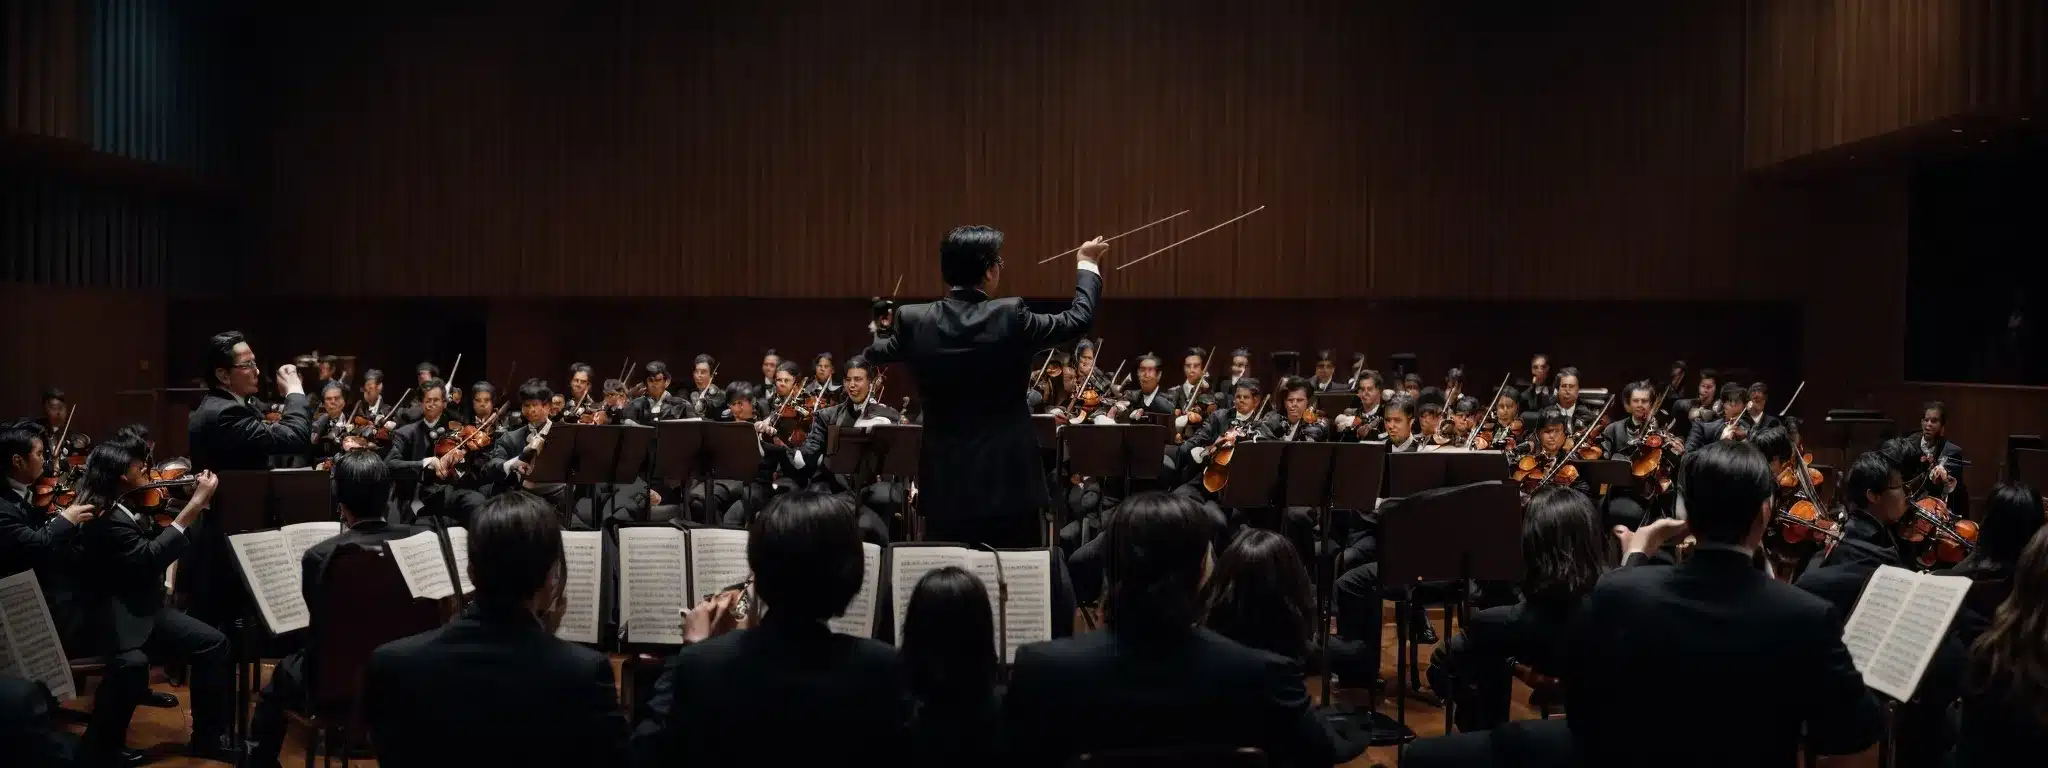 A Conductor Effortlessly Guides A Harmonious Orchestra Against The Backdrop Of An Enraptured Audience.